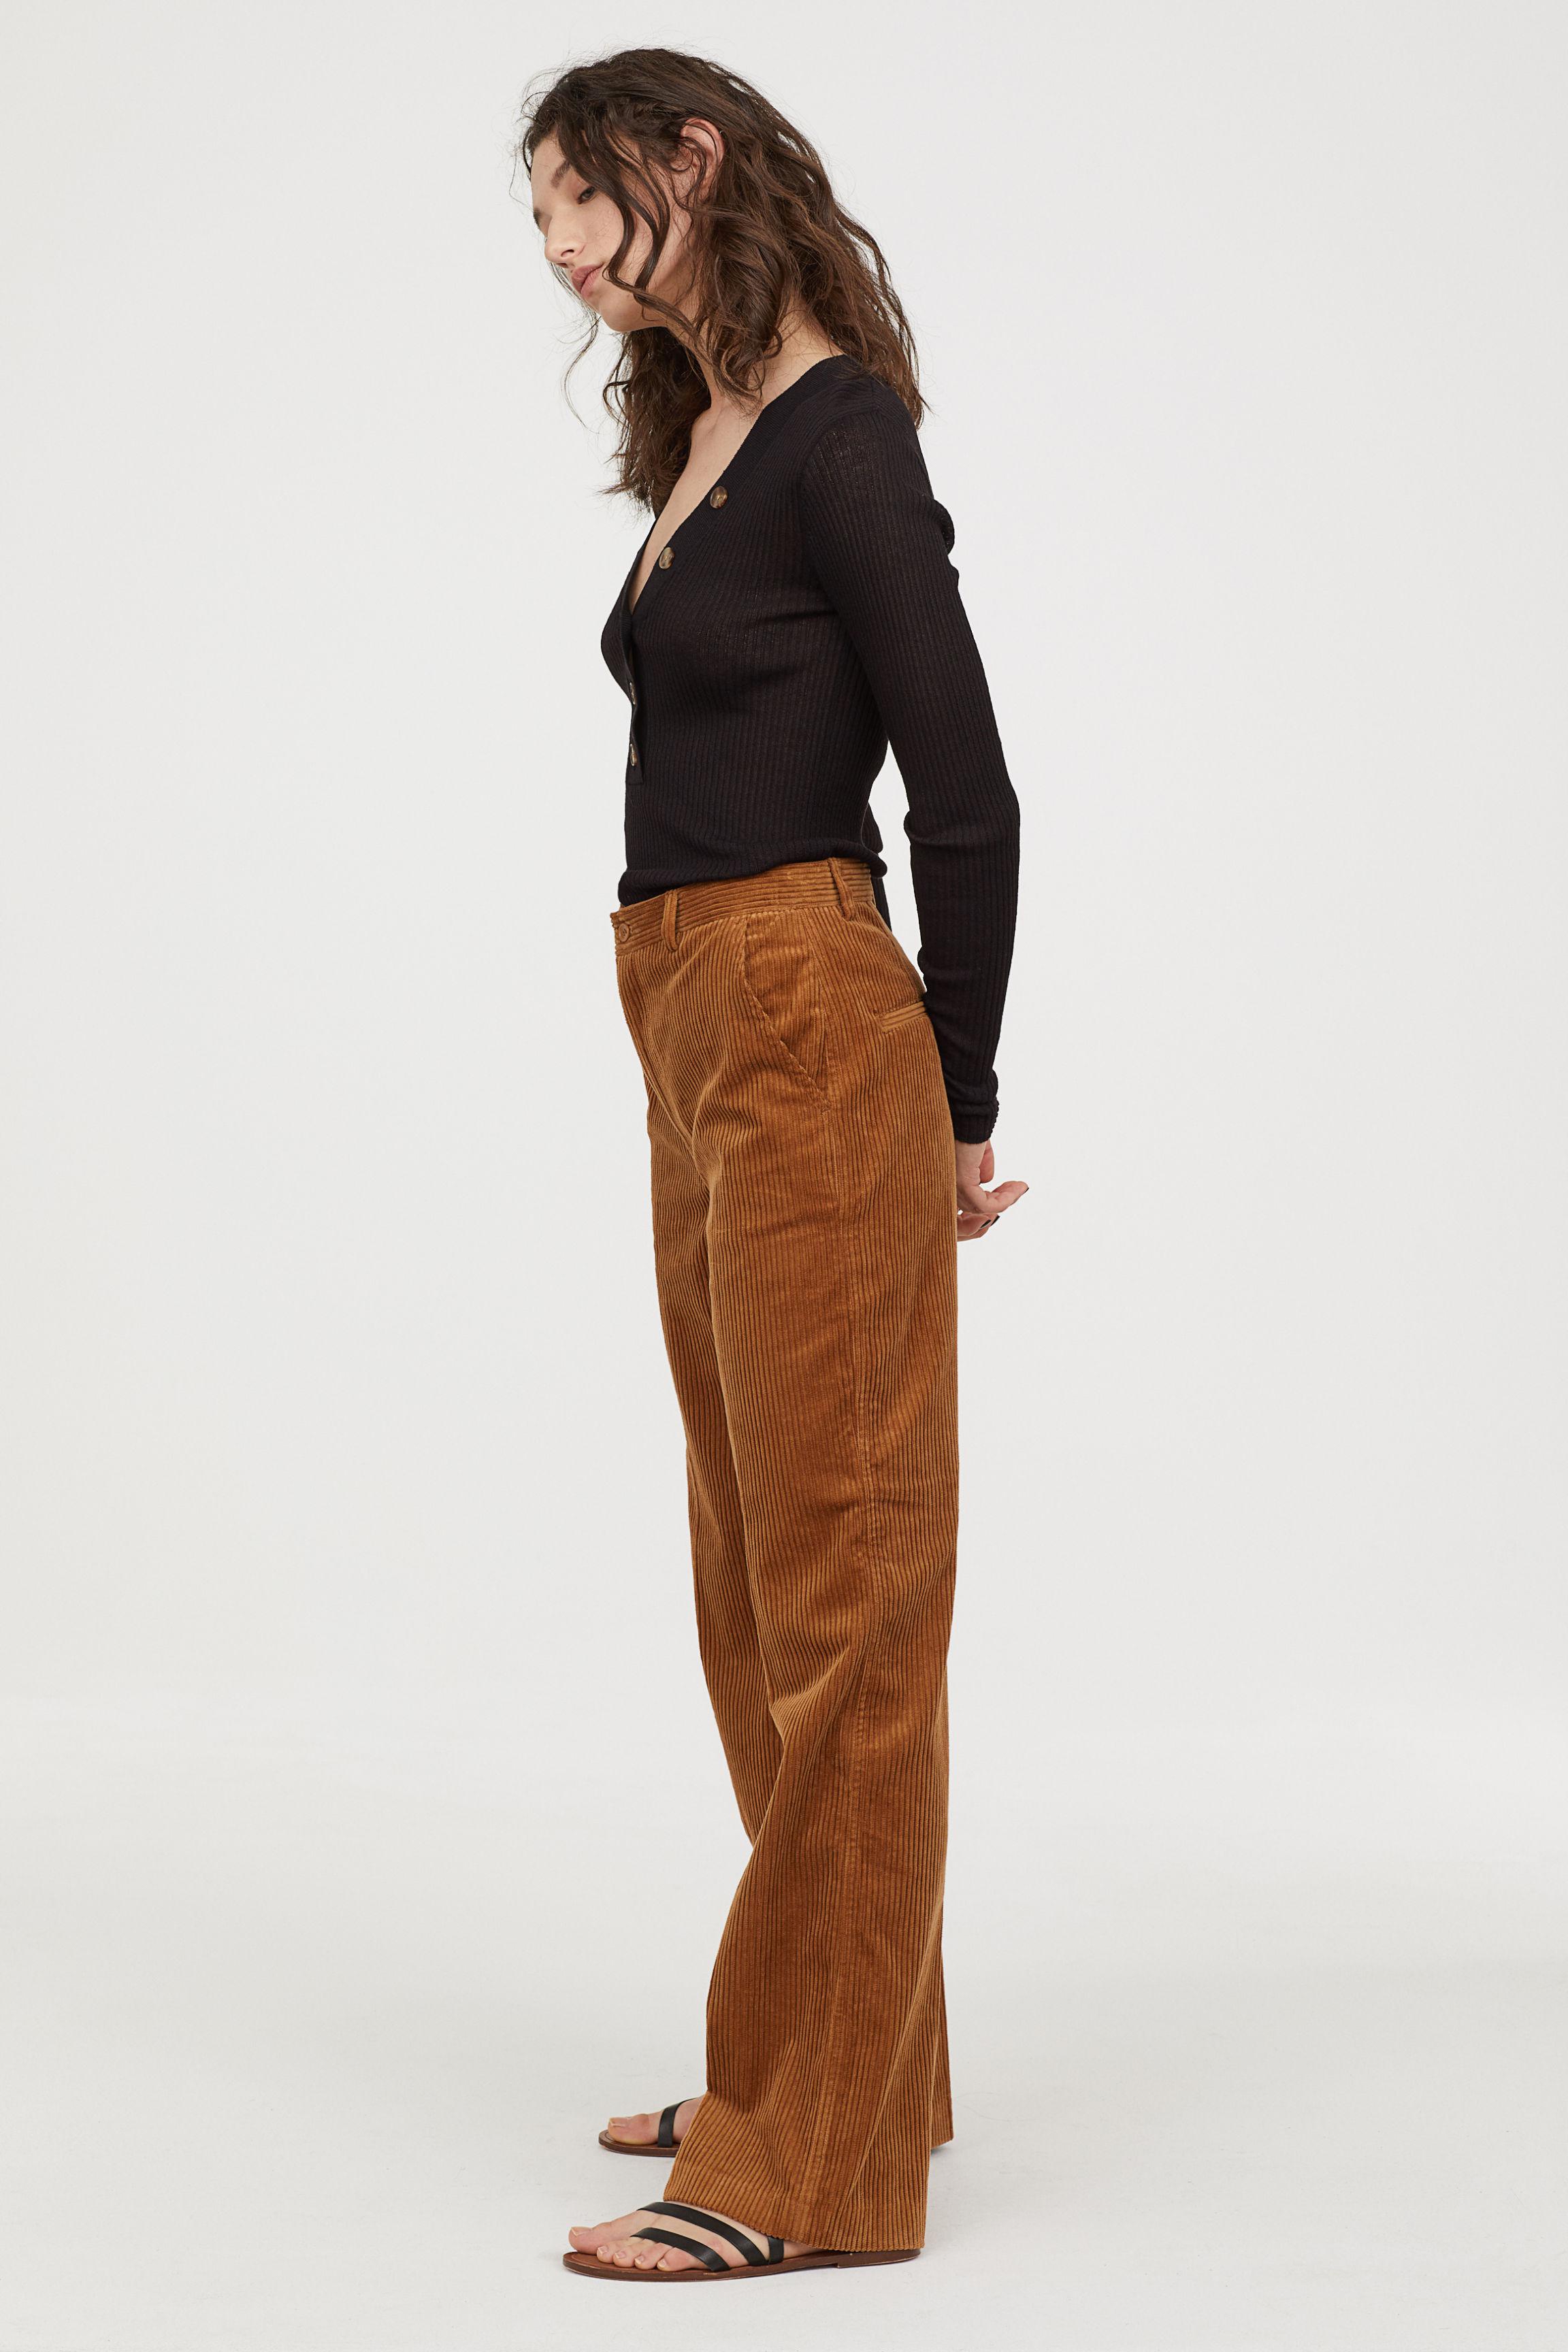 Details more than 73 ladies brown corduroy trousers latest - in.cdgdbentre